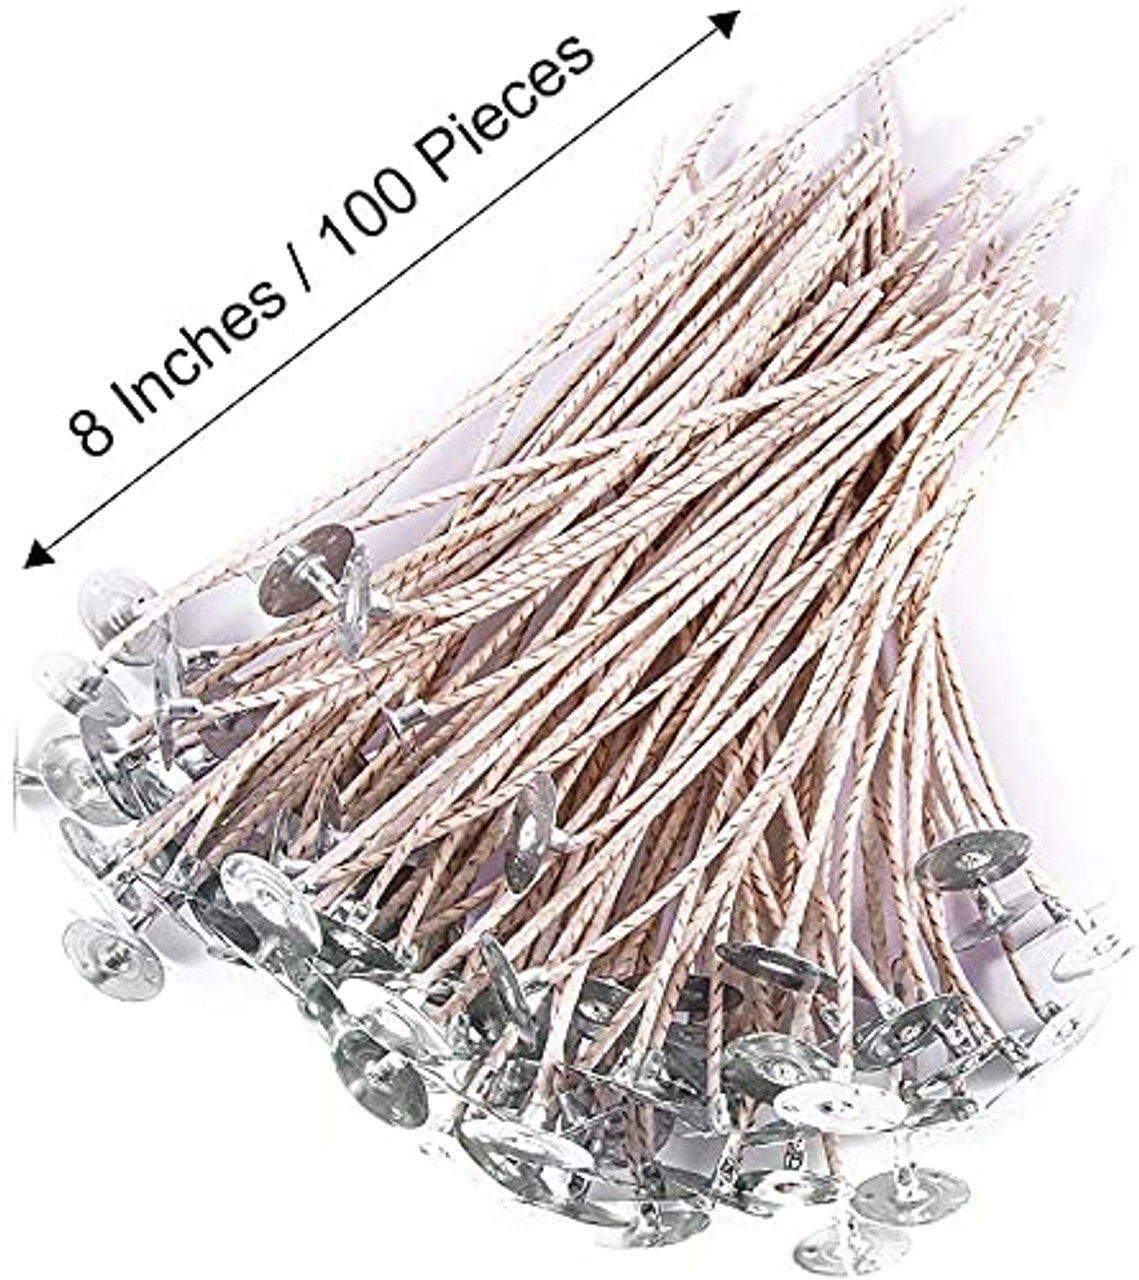 100pcs ECO16 Wicks for Soy Candles, 8 inch Pre-Waxed Candle Wick